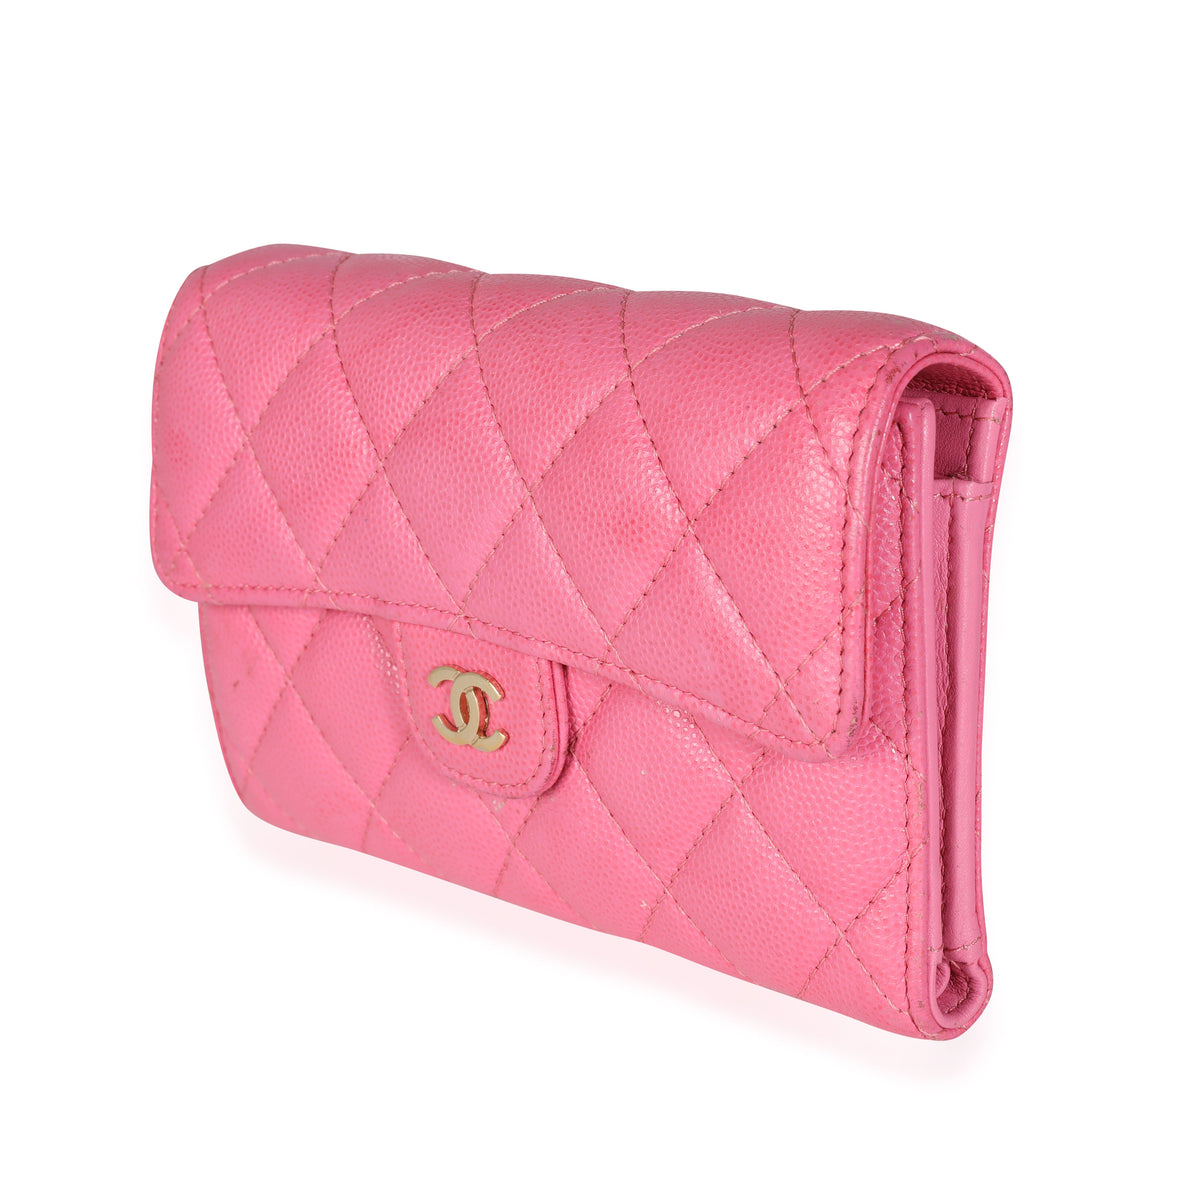 Chanel Iridescent Quilted Lambskin Like a Wallet Cube Chain Bag